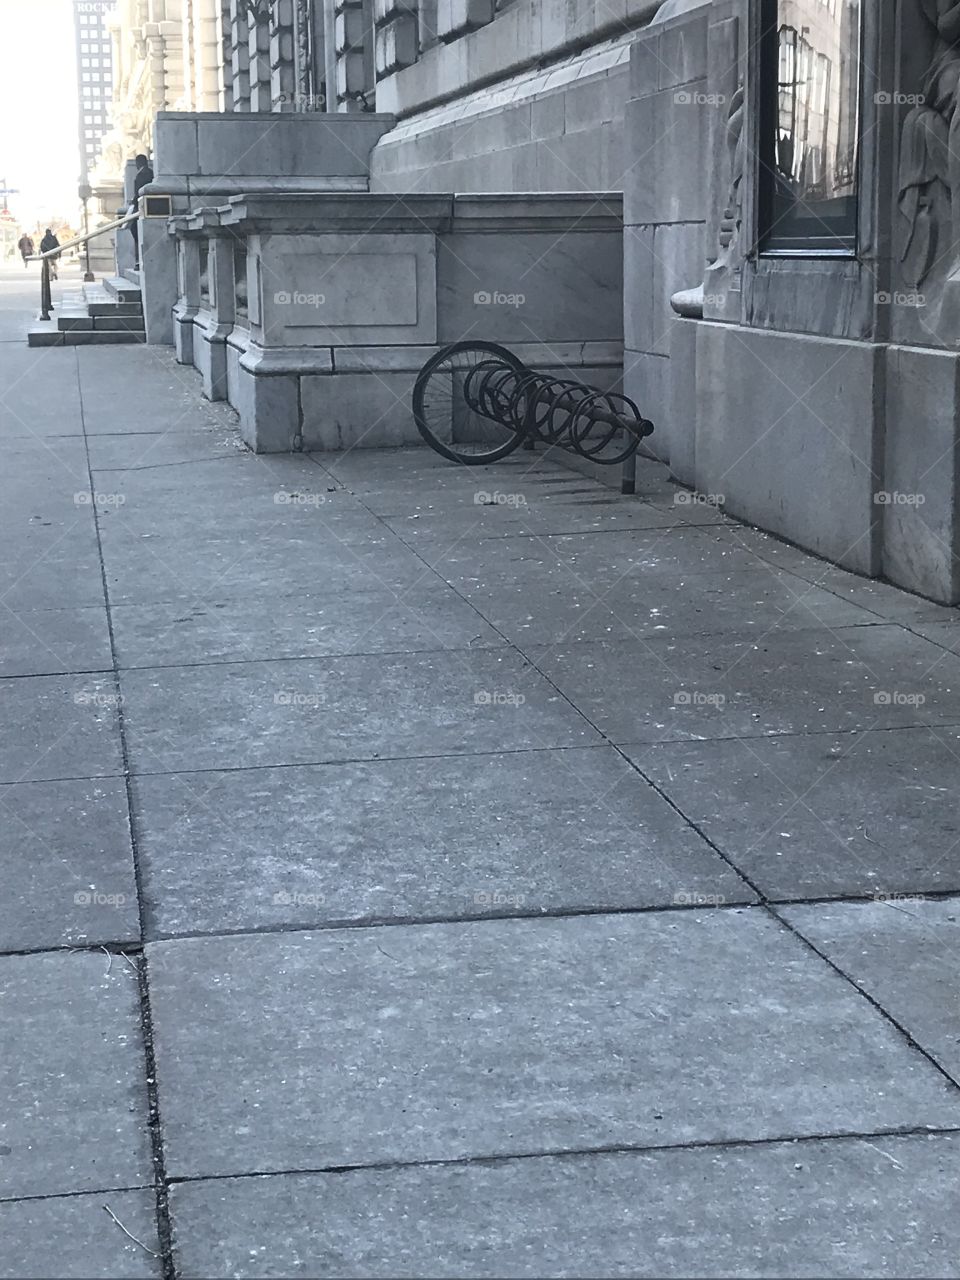 A lonely tire chained to a bike rack outside.